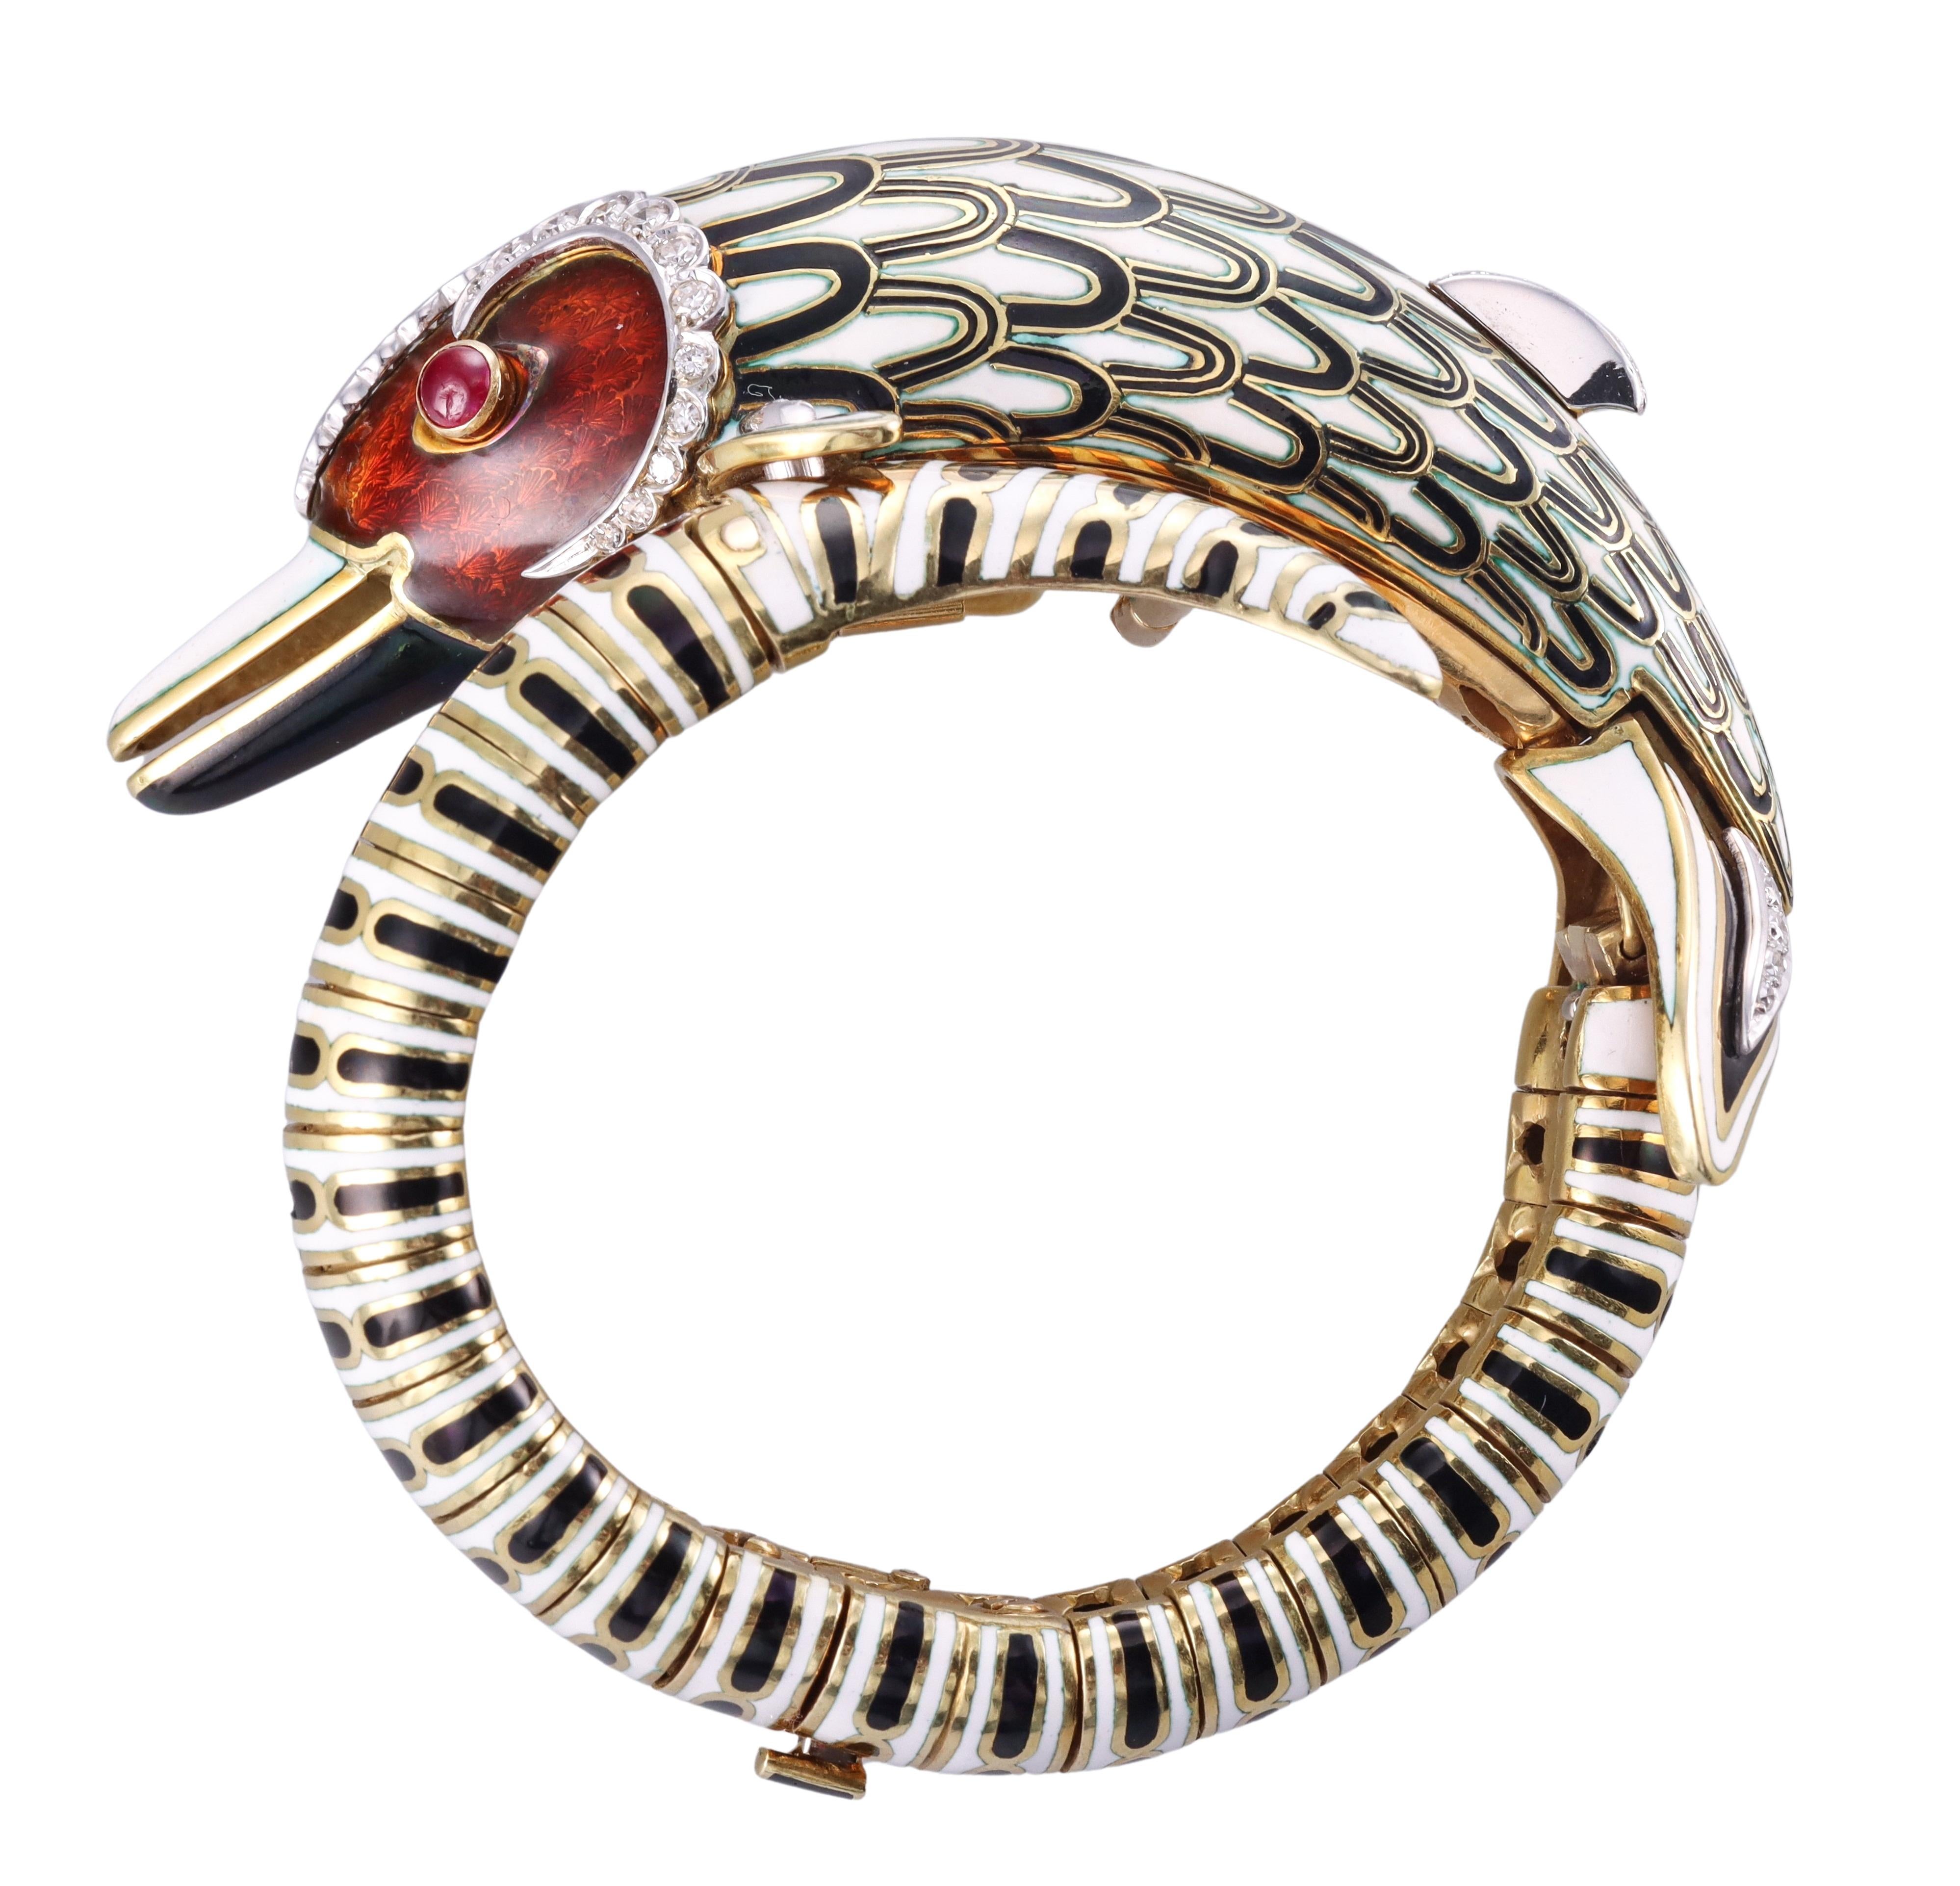 Impressive 18k yellow gold bracelet by Frascarolo, set with enamel, ruby eyes and approximately 1.00ctw H/VS diamonds. The bracelet depicts a mythical dolphin, decorated with intricate enamel. Bracelet will fit a smaller size wrist - approx. 6.5